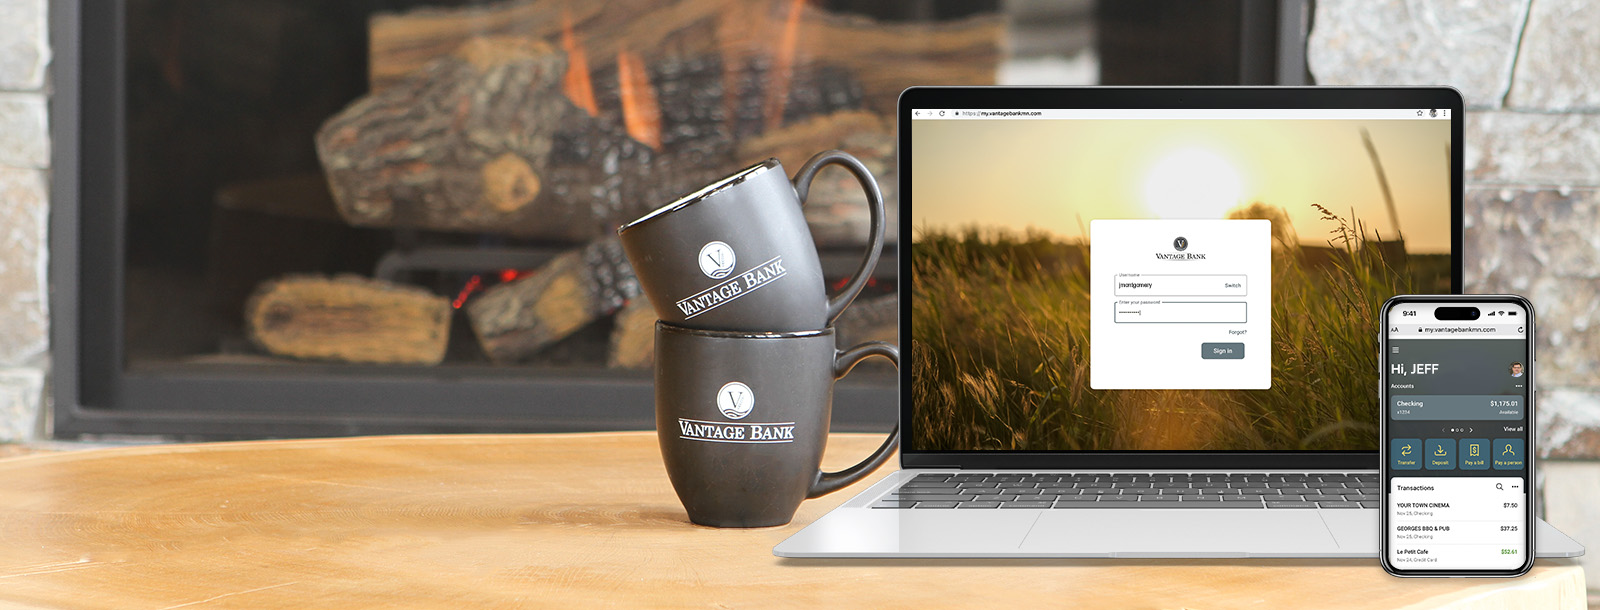 Image of Vantage Banks coffee mugs, online banking login on laptop, and mobile app on cell phone.